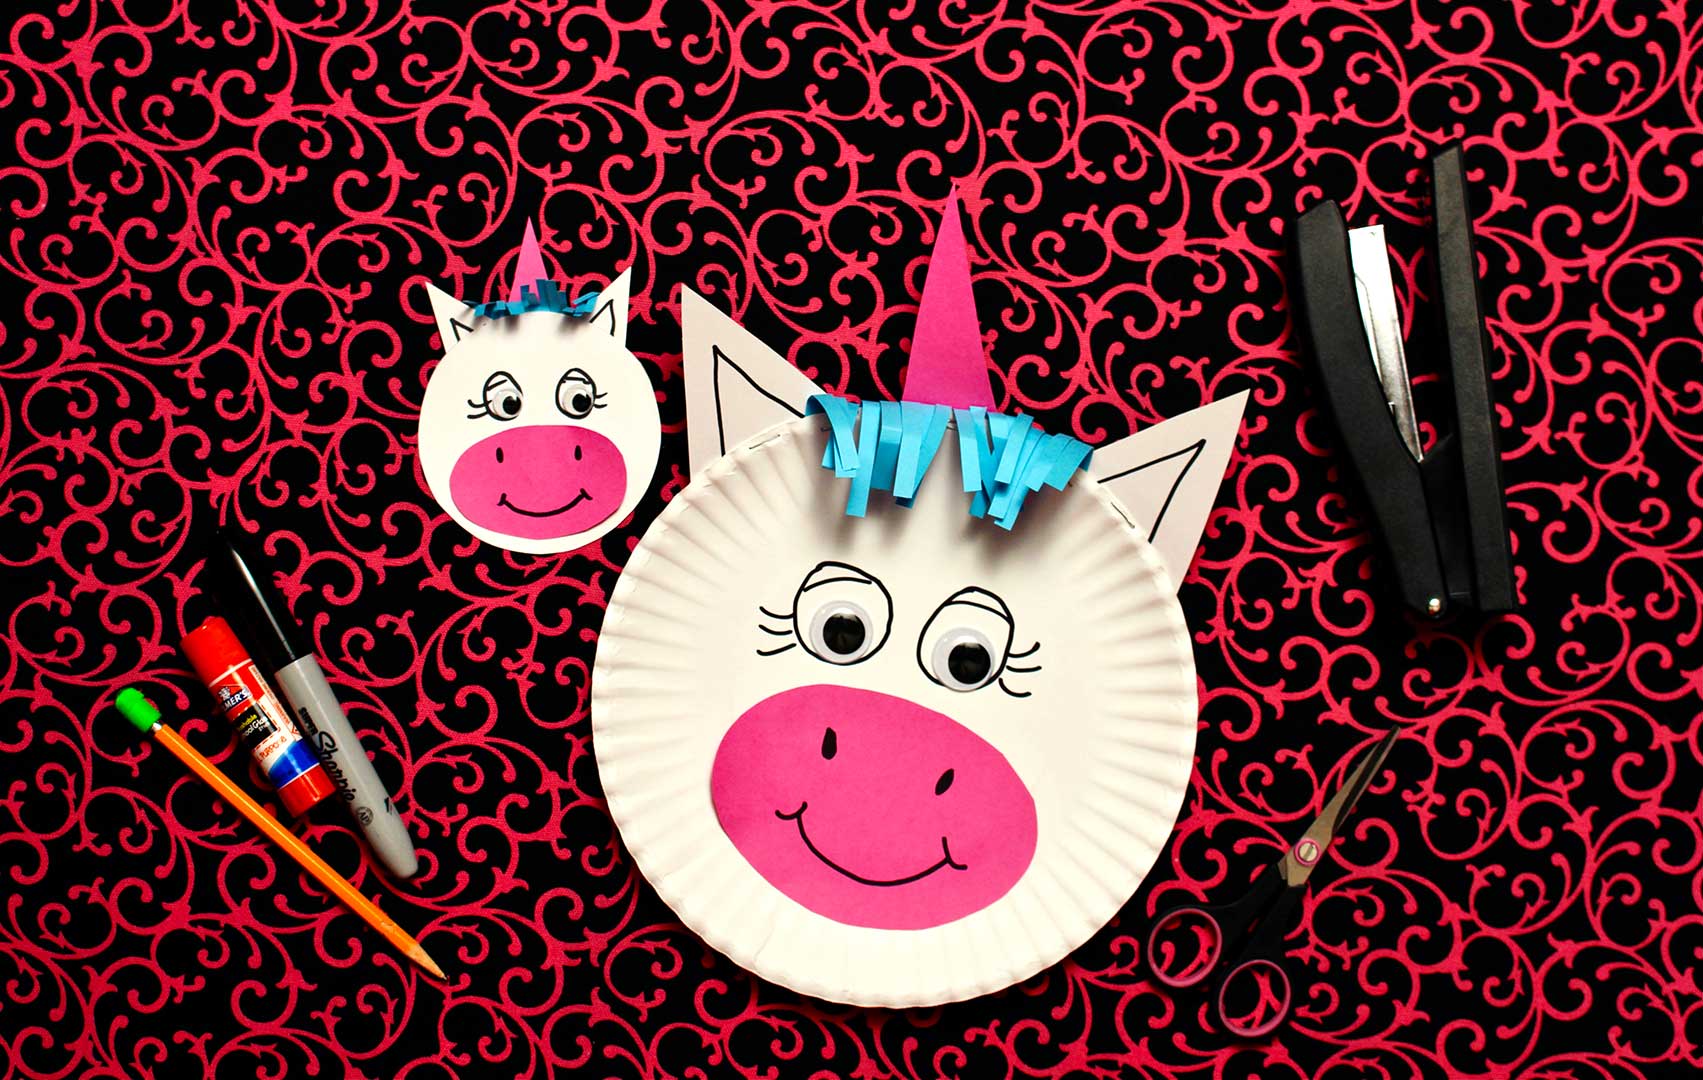 Paper plate unicorn head rest on decorative neon pink and black background with scissors, stapler, pencil, glue stick and sharpie.